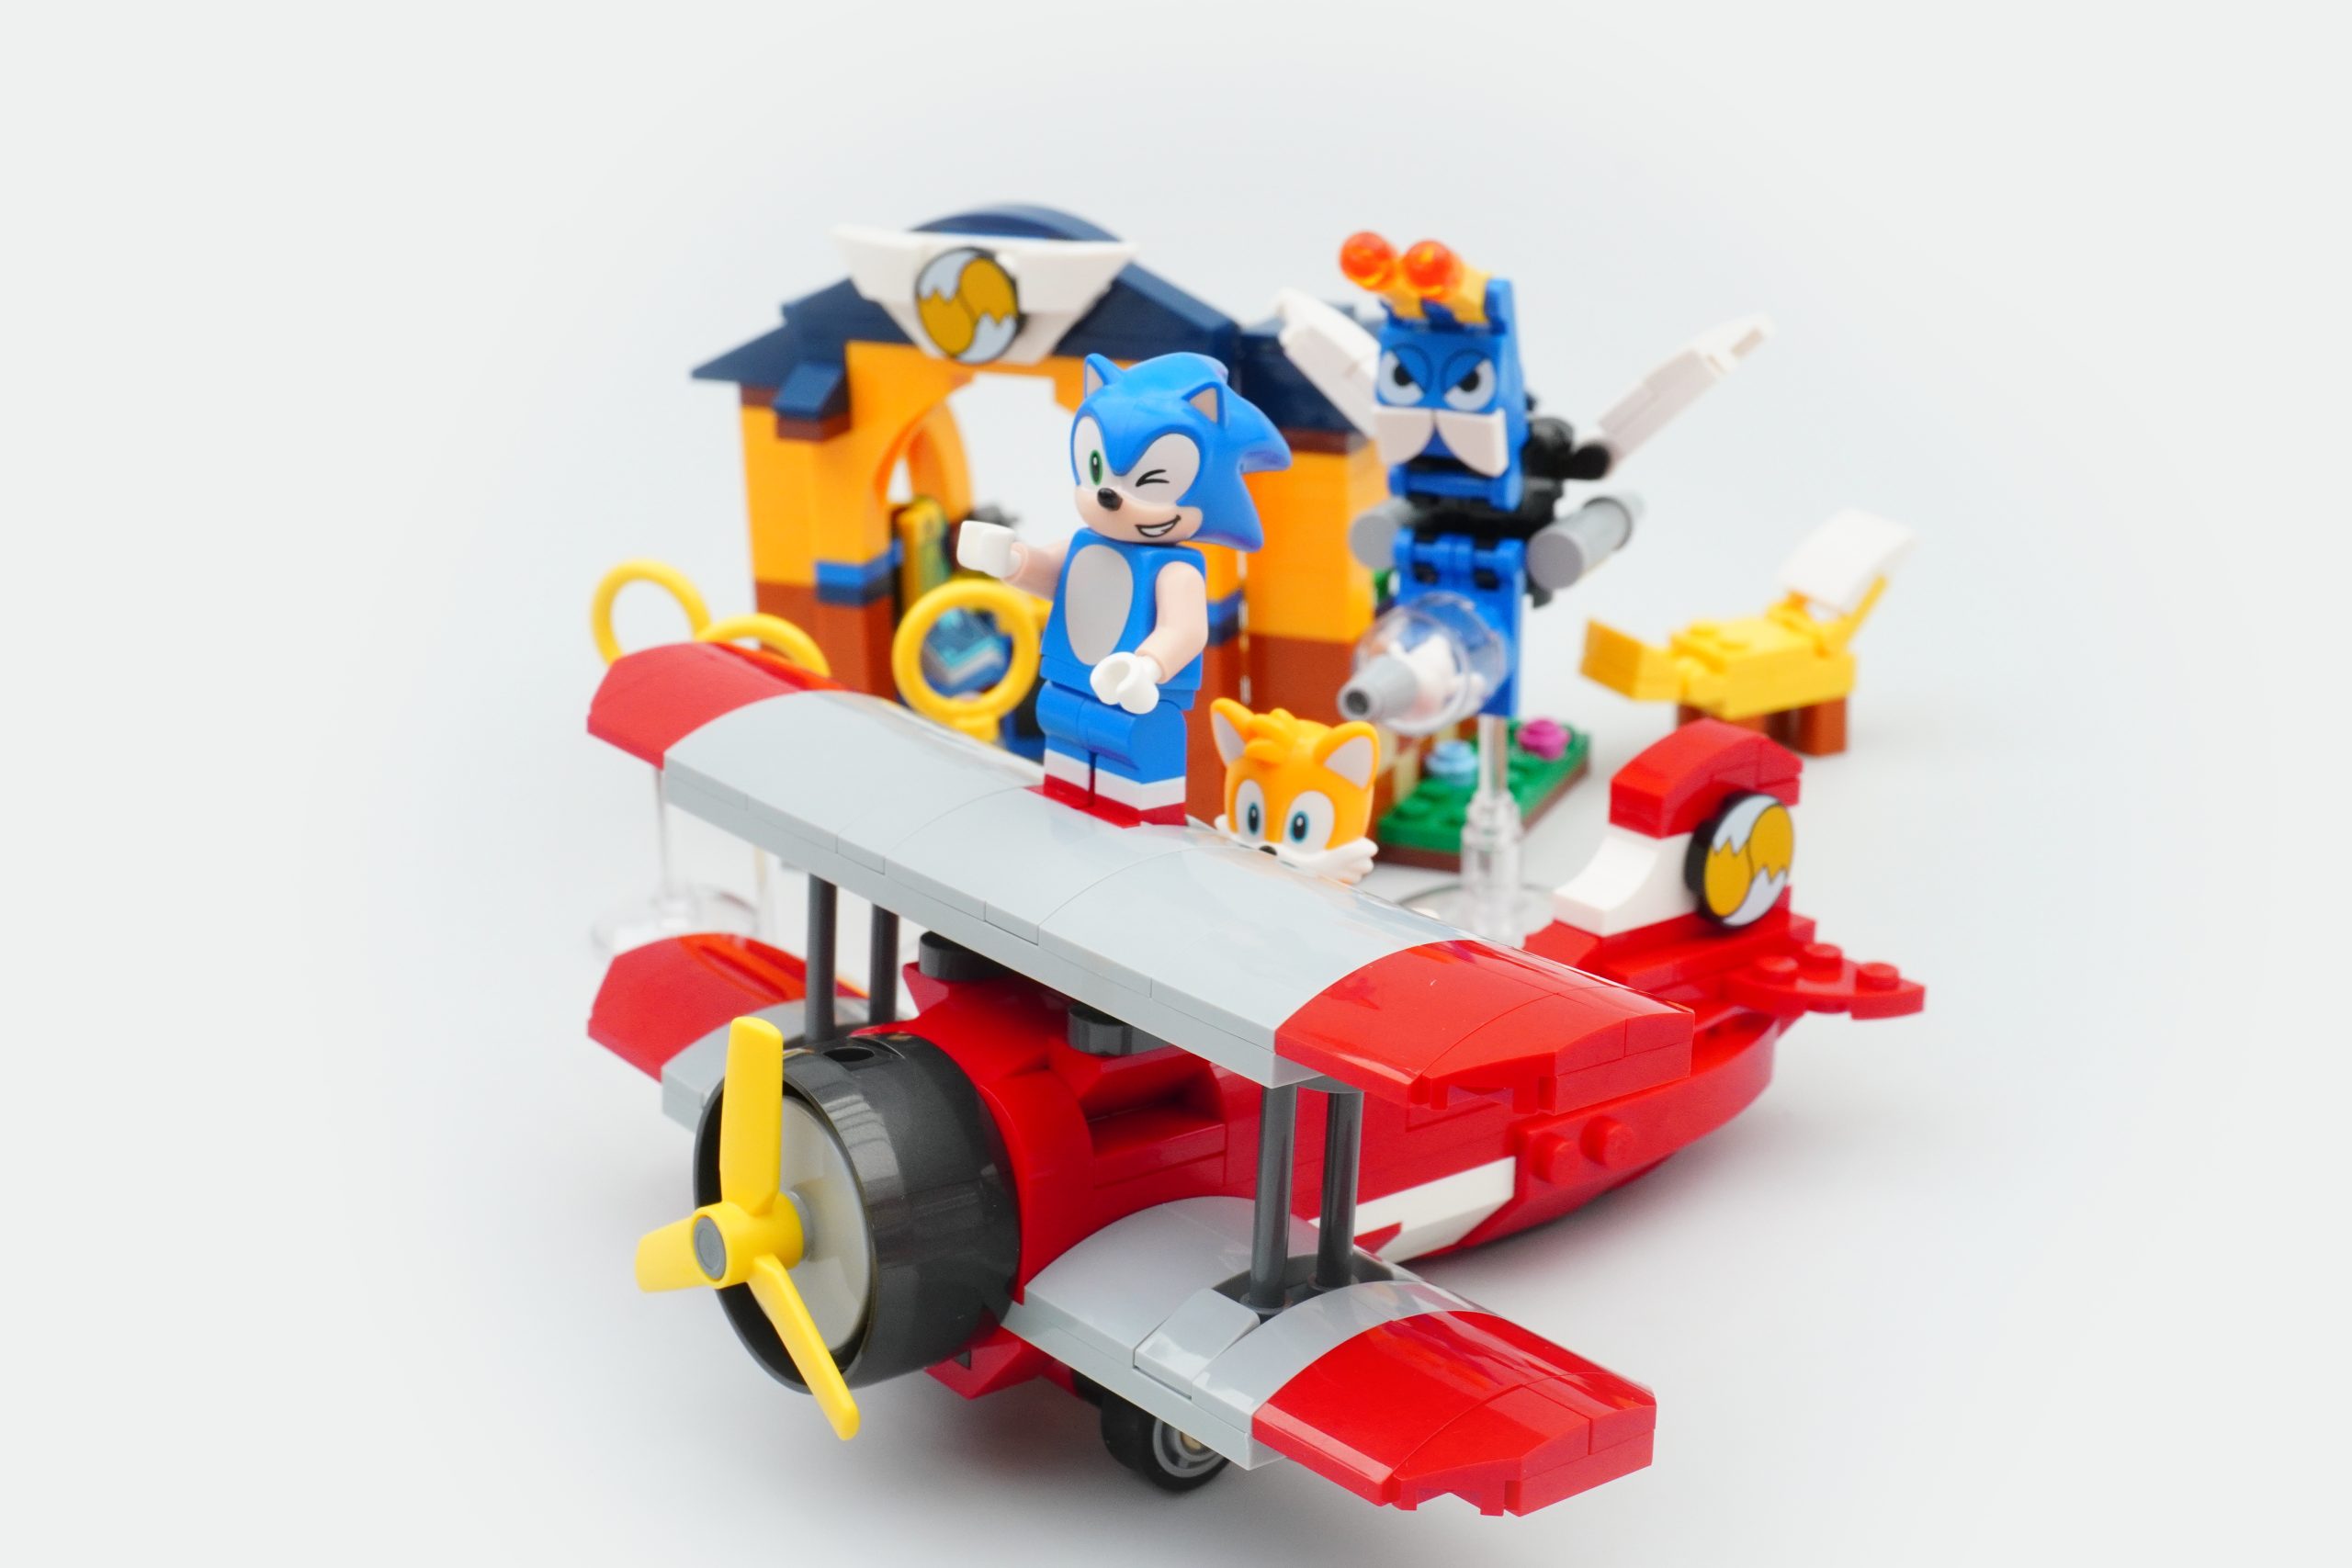 LEGO 76991 Tails' Workshop and Tornado Plane - LEGO Sonic the